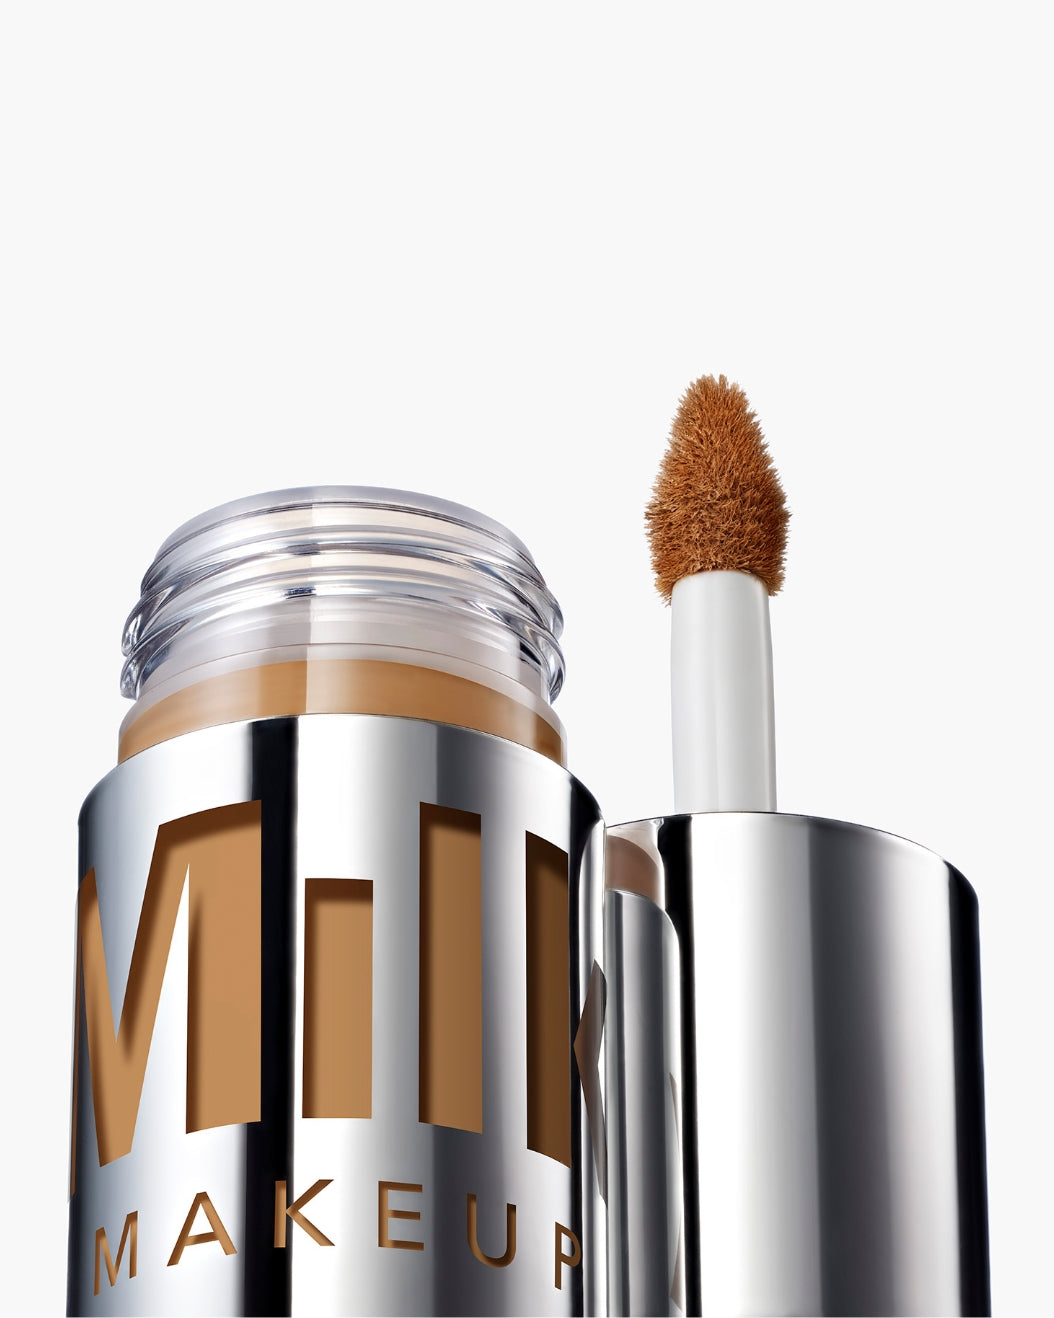 Product shot of a bottle of Milk Makeup Future Fluid All Over Cream Concealer against a white background.